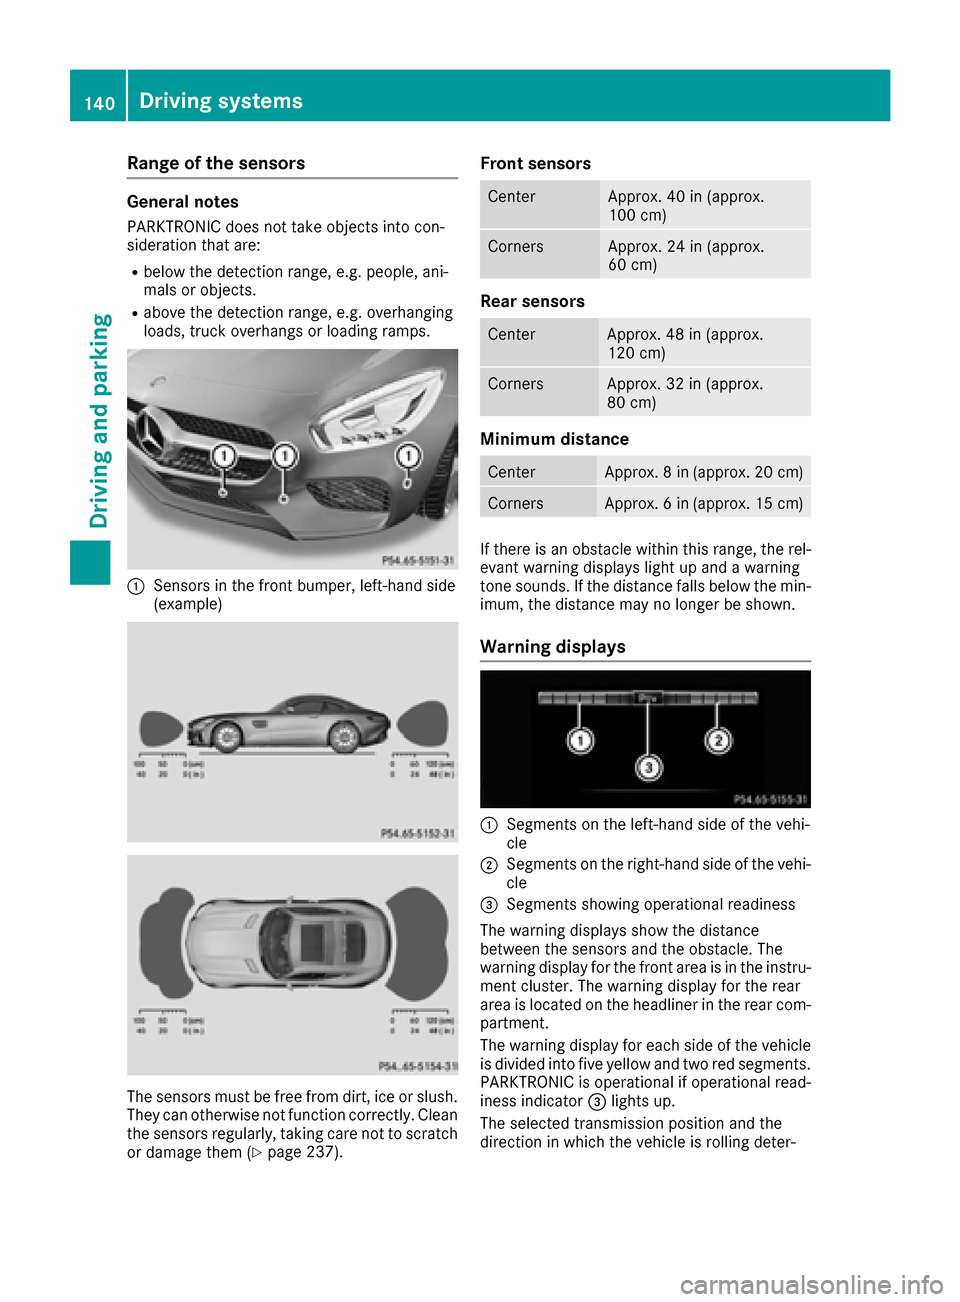 MERCEDES-BENZ AMG GT S 2016 C190 Owners Manual Range of the sensors
General notes
PARKTRONIC does not take objects into con-
sideration that are:
Rbelow the detection range, e.g. people, ani-
mals or objects.
Rabove the detection range, e.g. overh